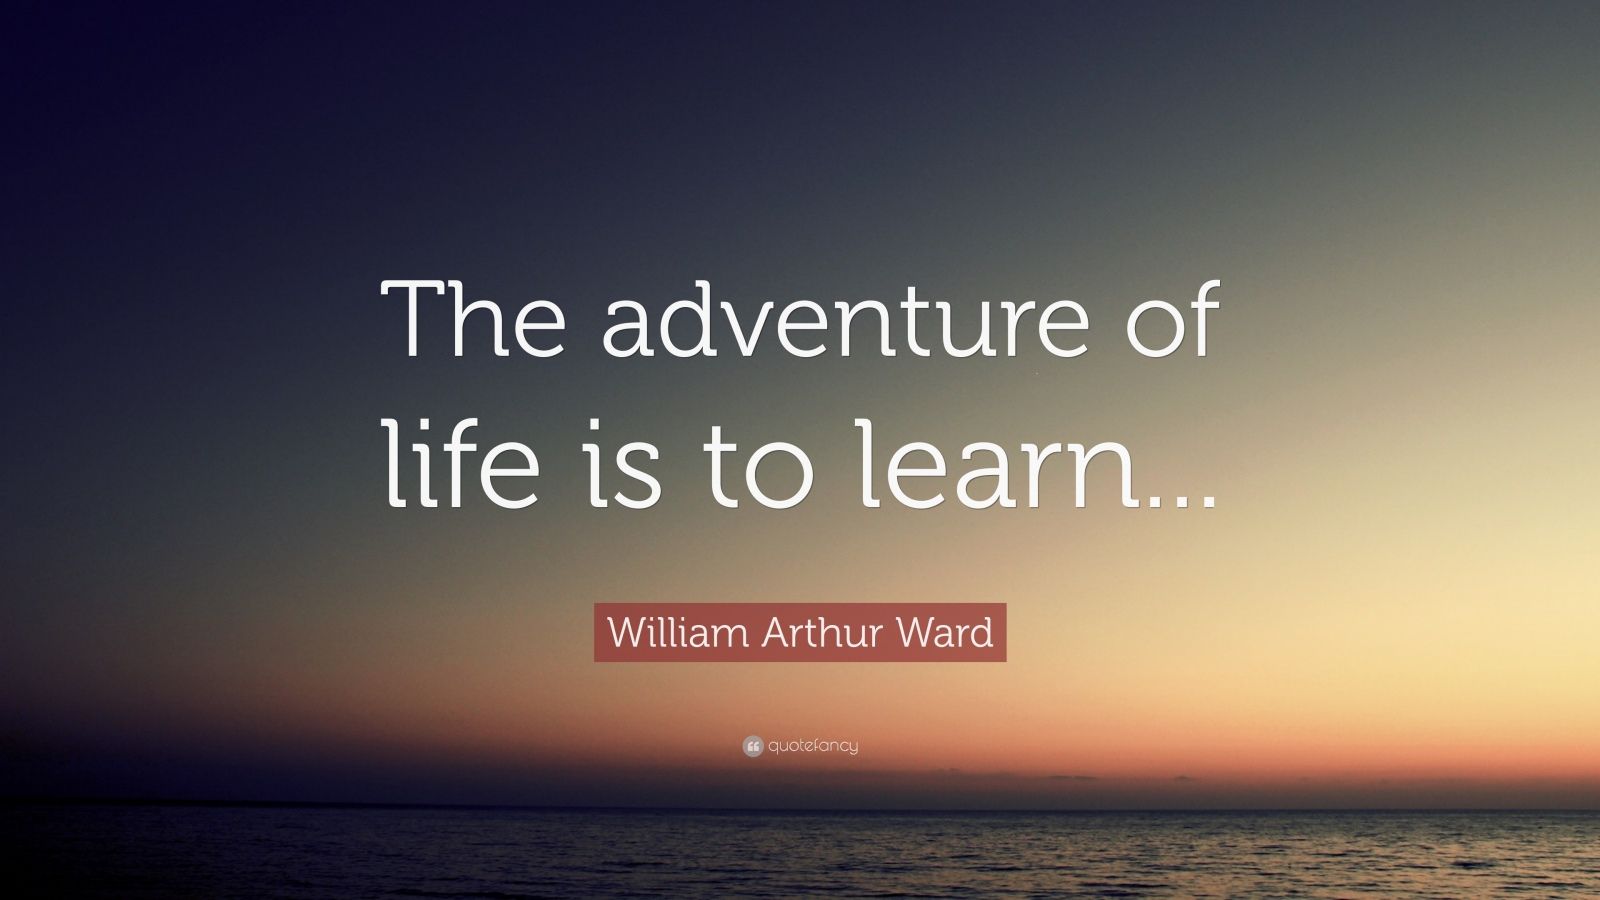 William Arthur Ward Quote: “The adventure of life is to learn...” (12